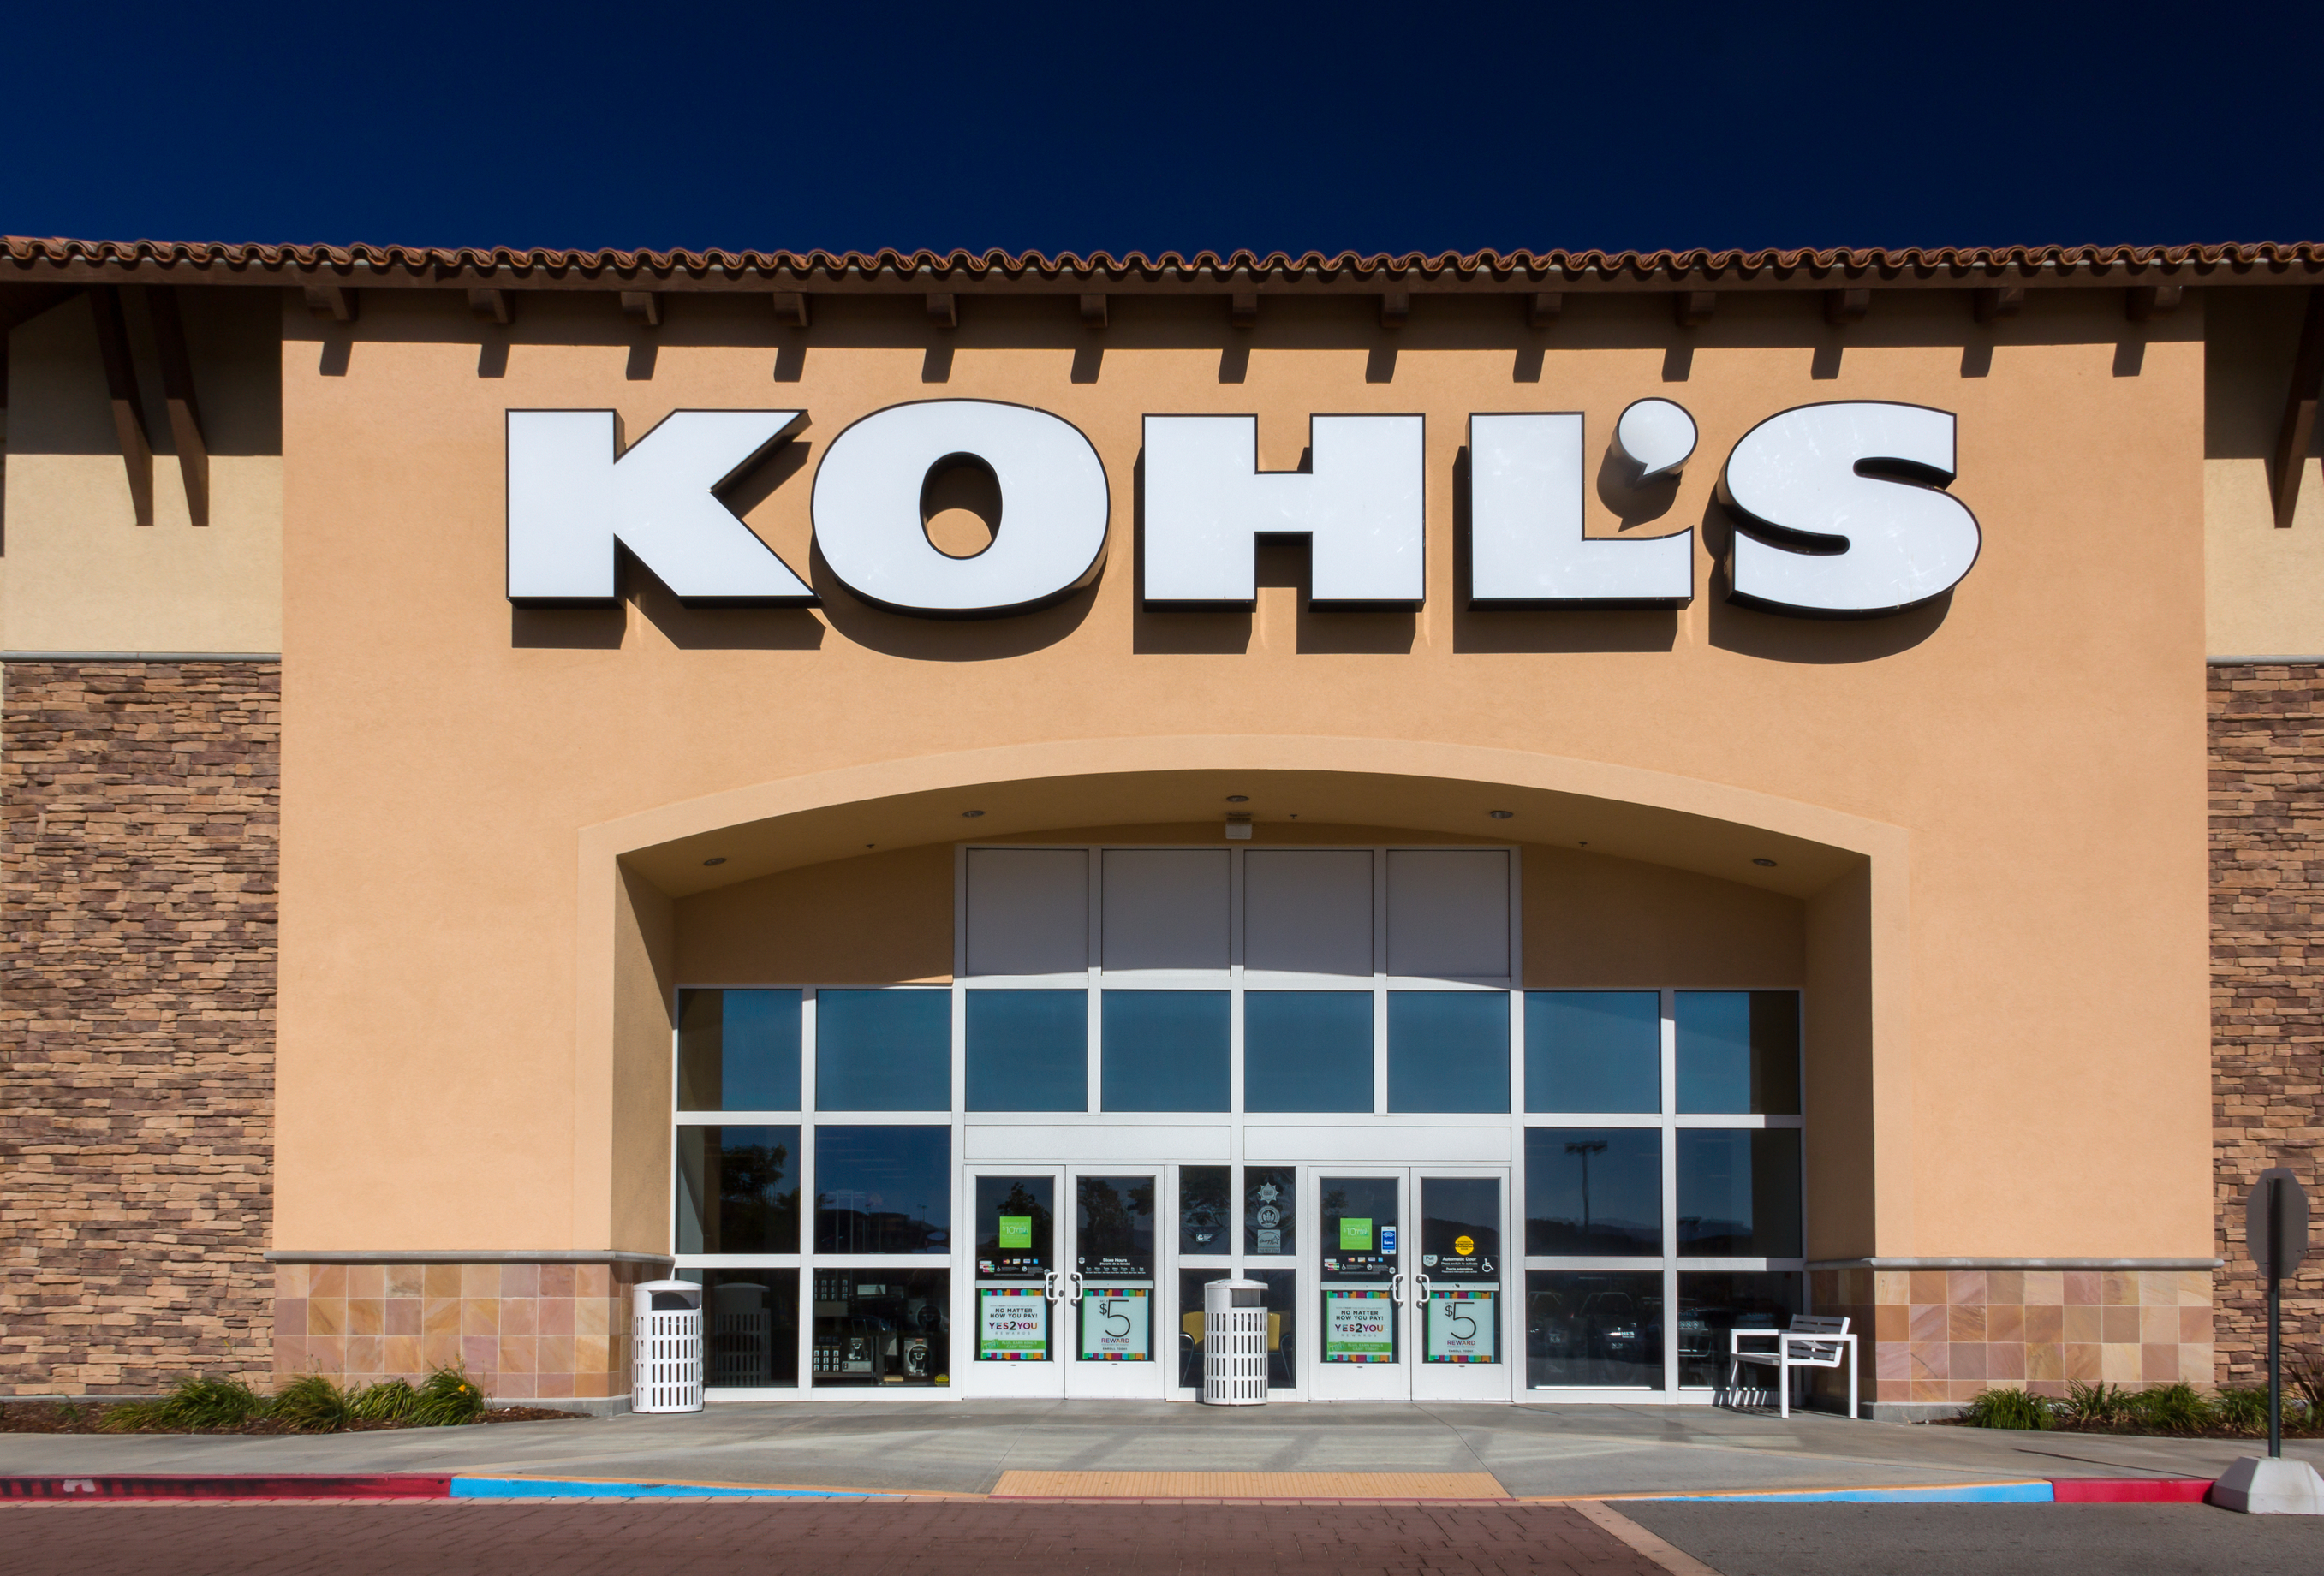 Kohl’s: Save 25% sitewide or in stores with coupon